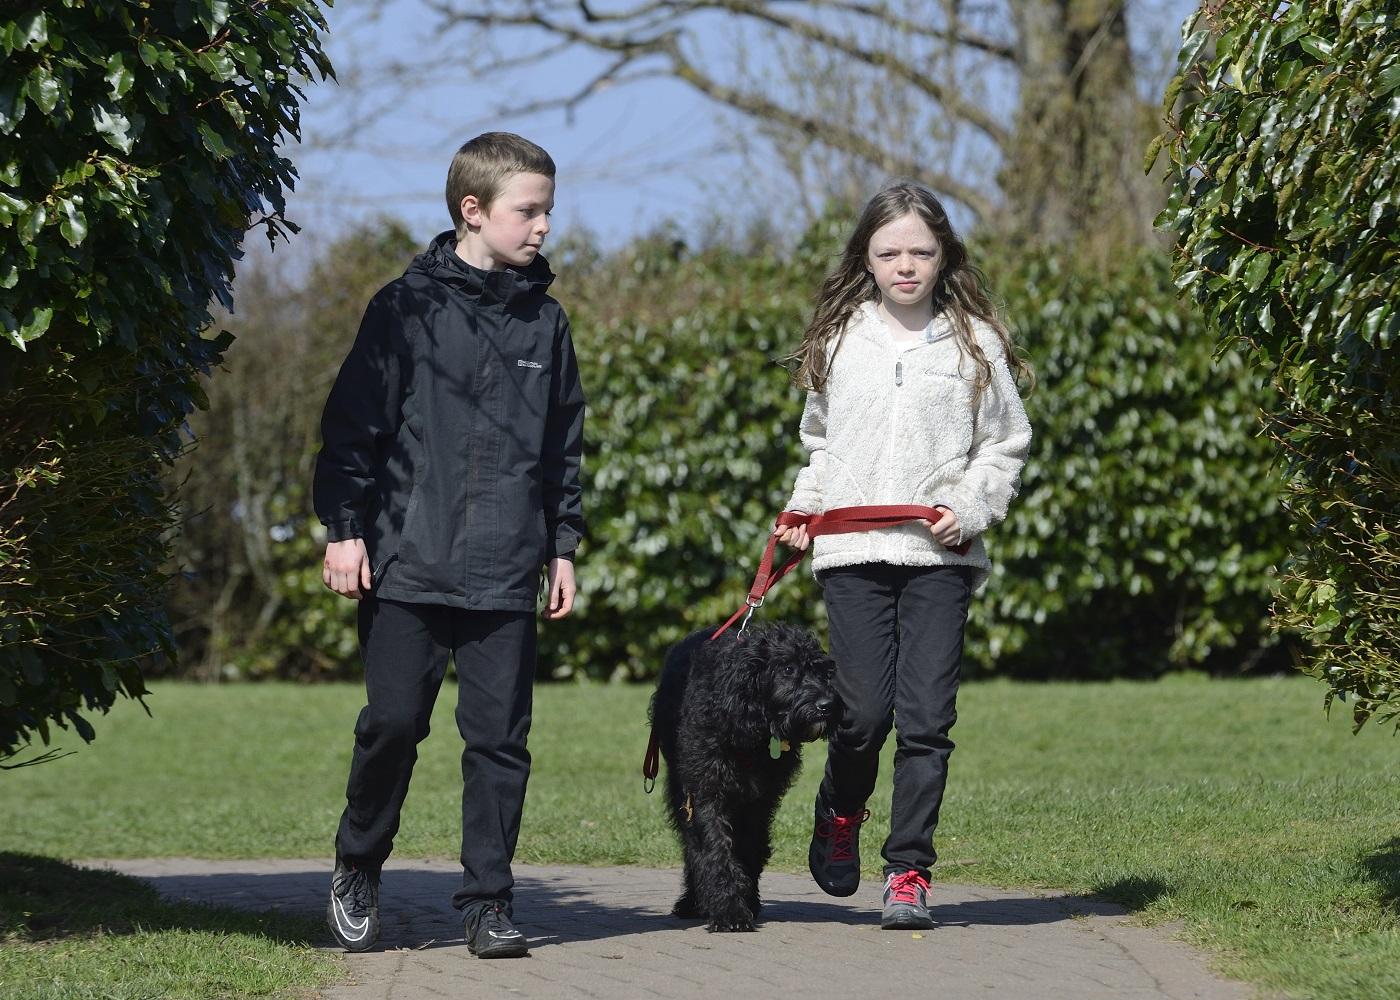 Two children walking a dog on a path.